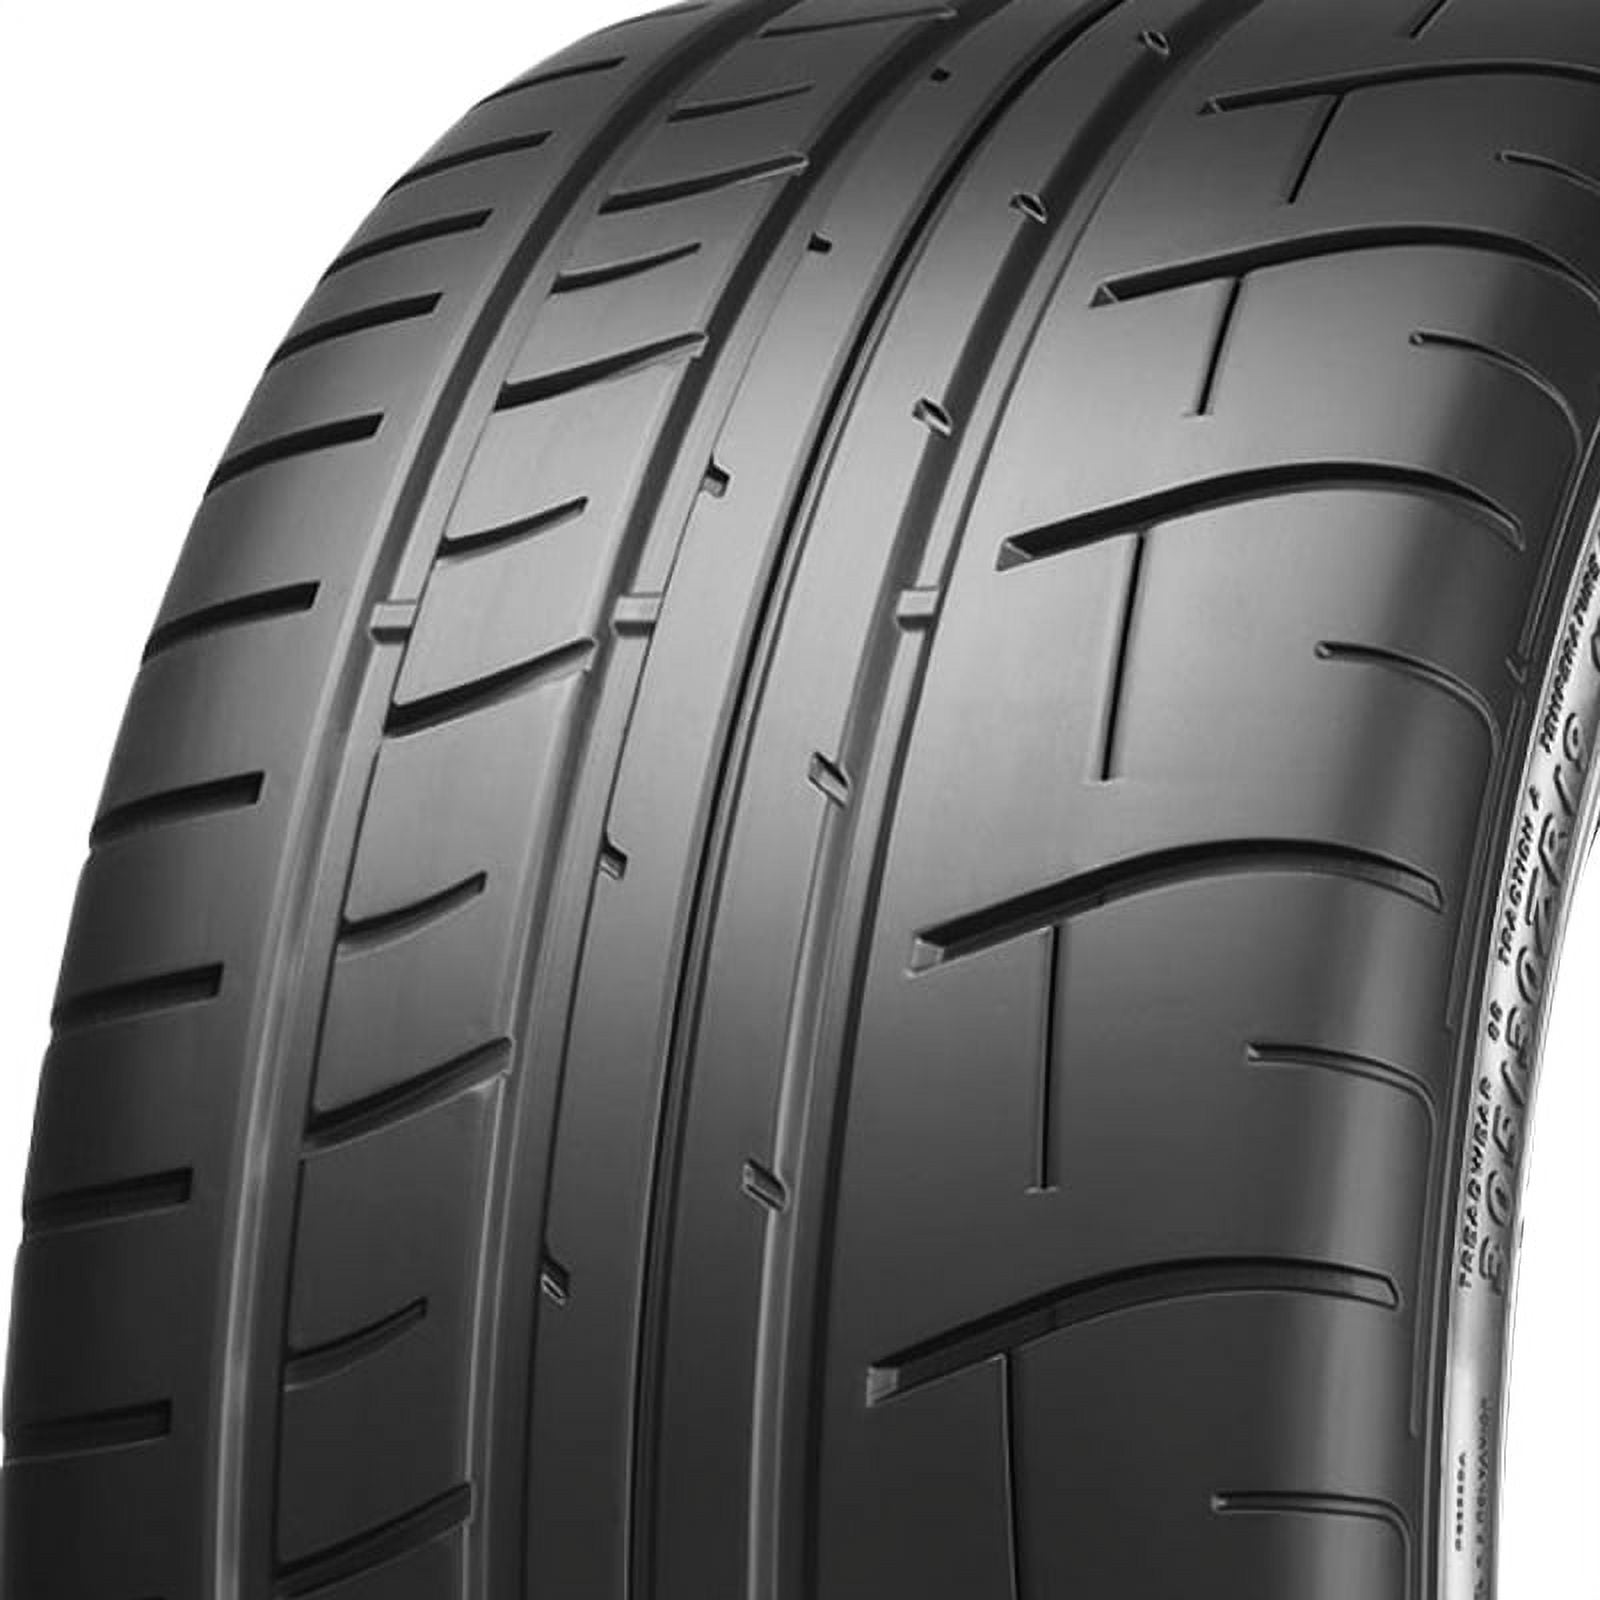 One Tire Dunlop Sport Maxx Race 2 305/30ZR20 103Y XL (N1) Racing Fits:  2020-22 Ford Mustang Shelby GT500